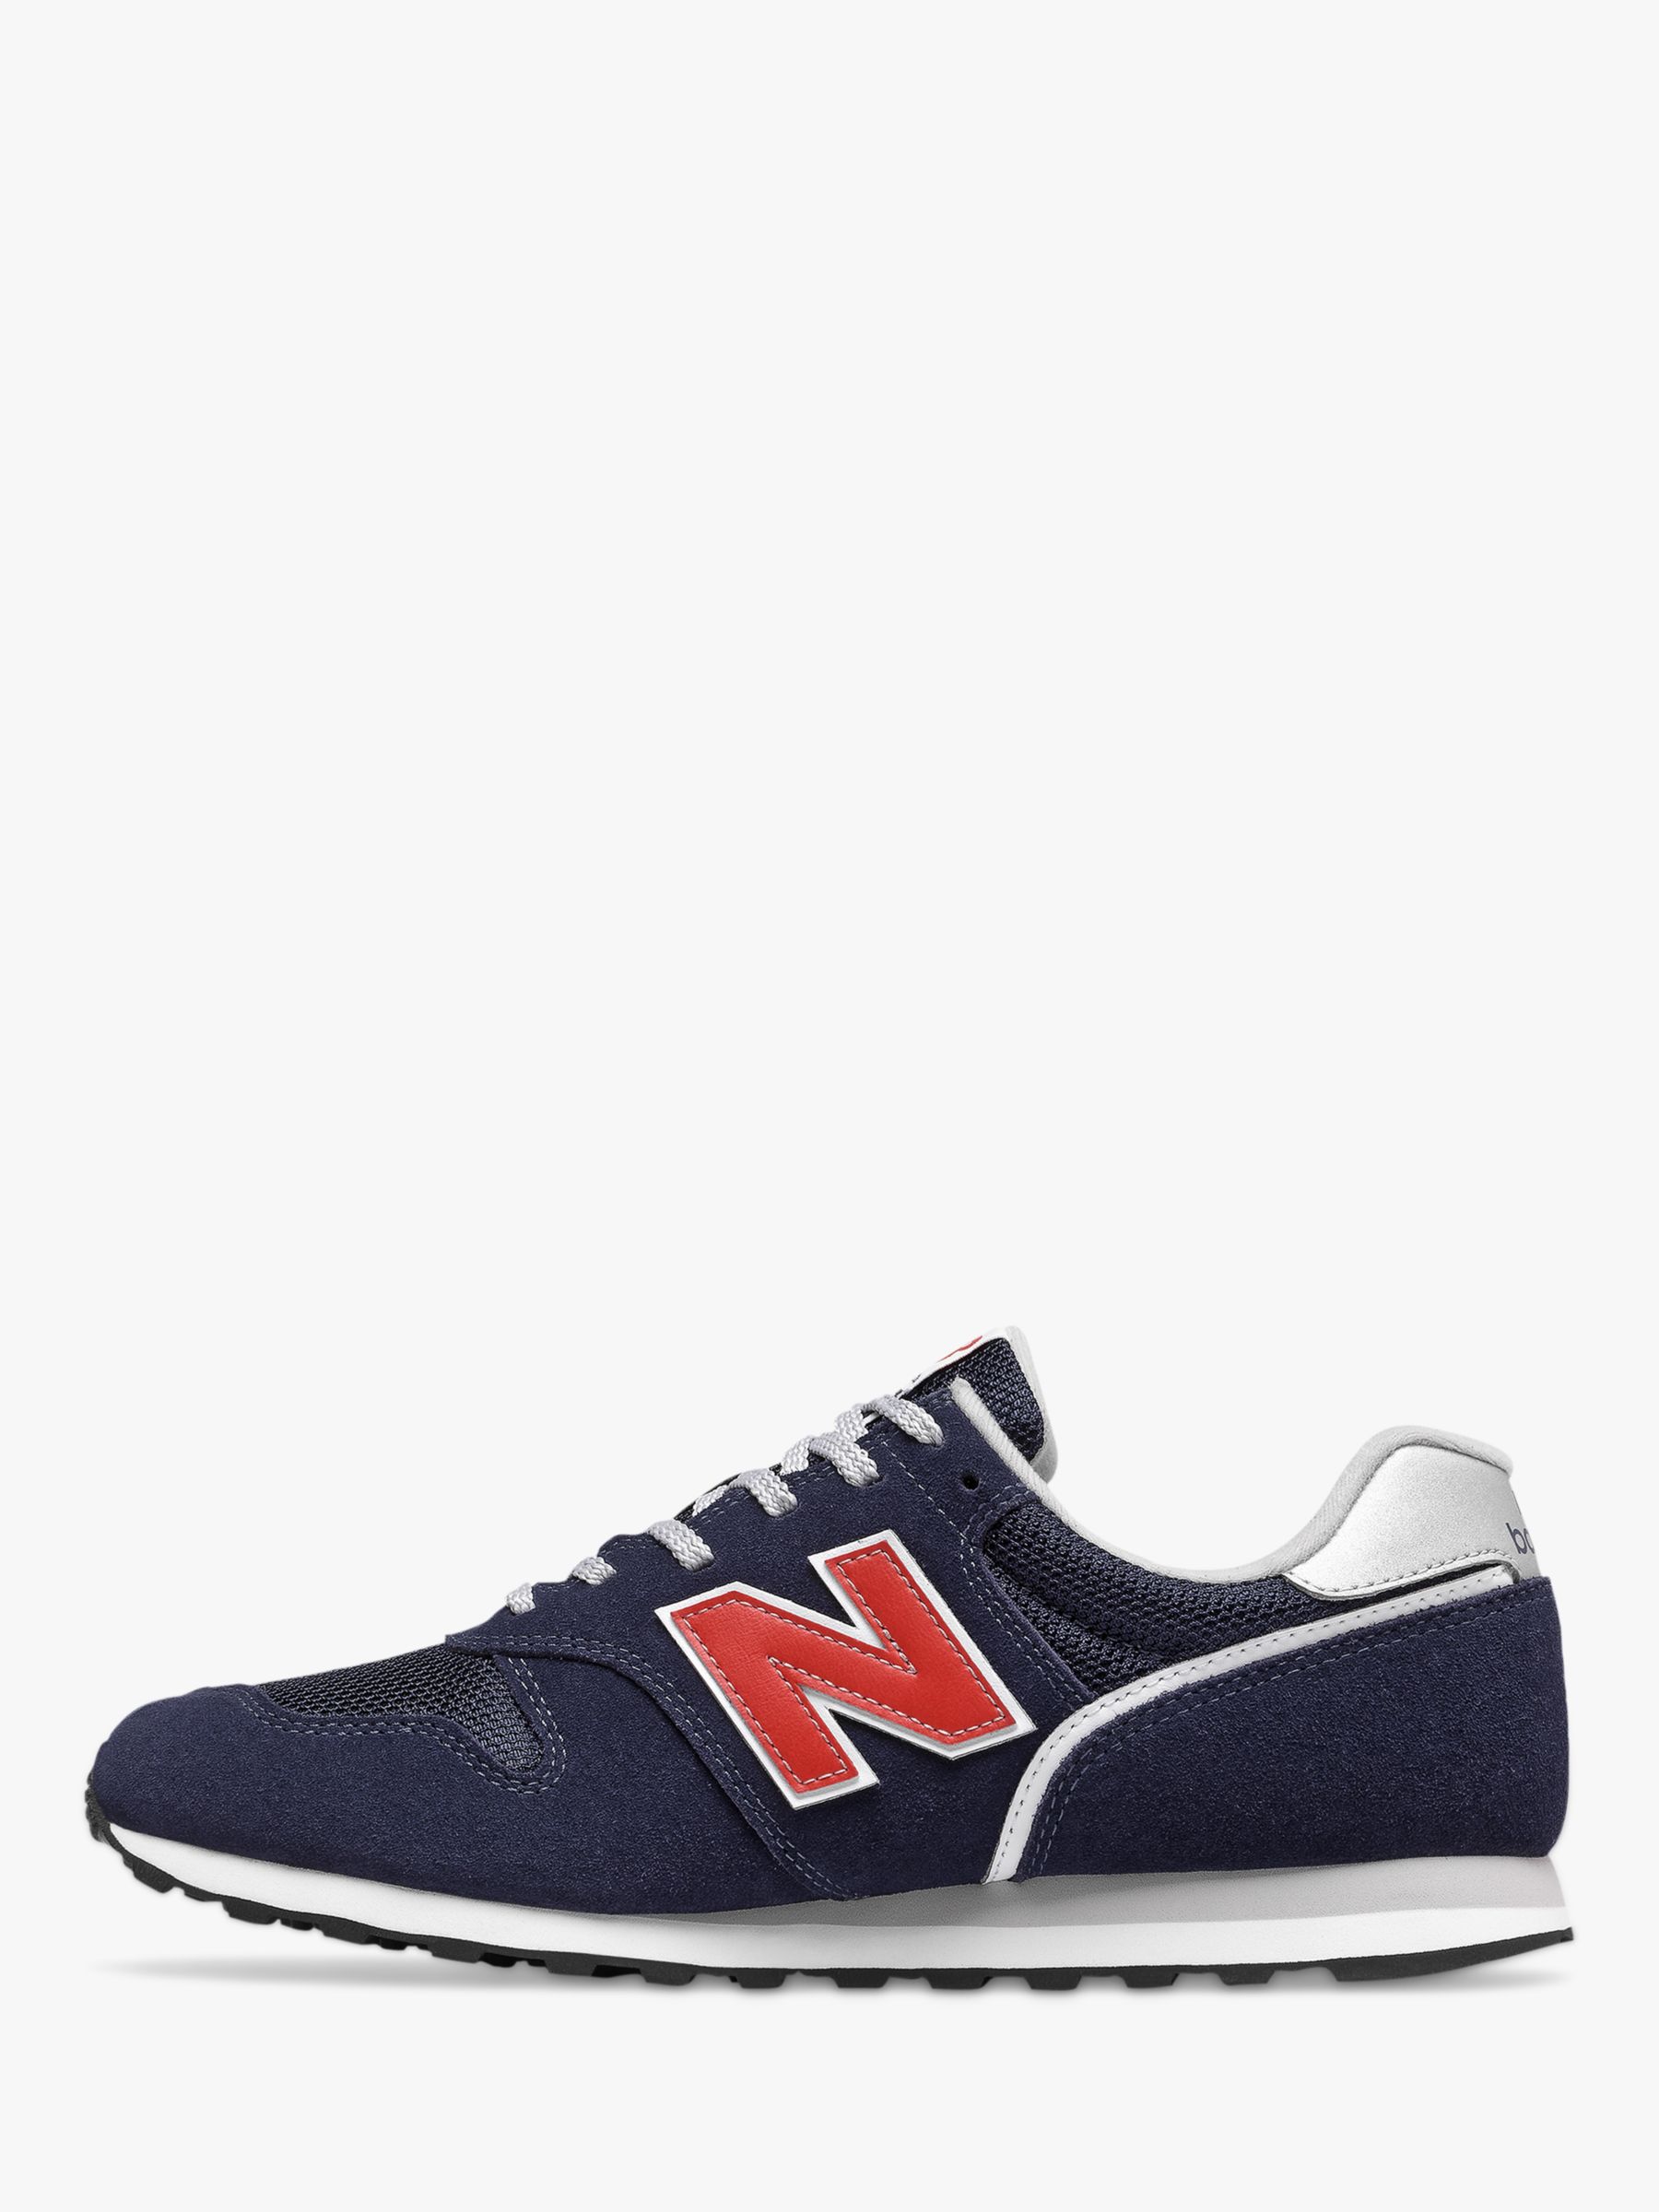 New Balance 373 V2 Trainers, Navy/Red at John Lewis & Partners